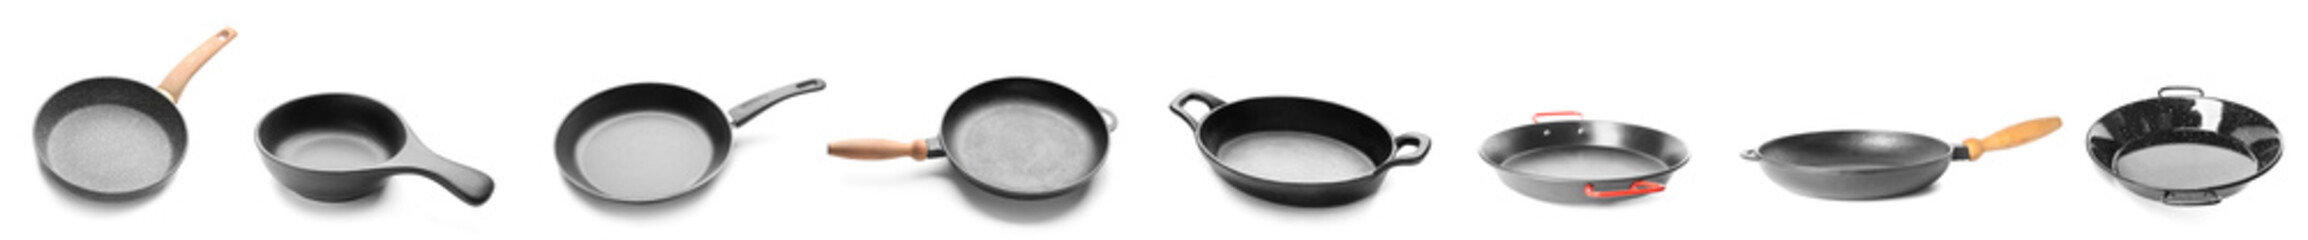 Set of empty frying pans on white background